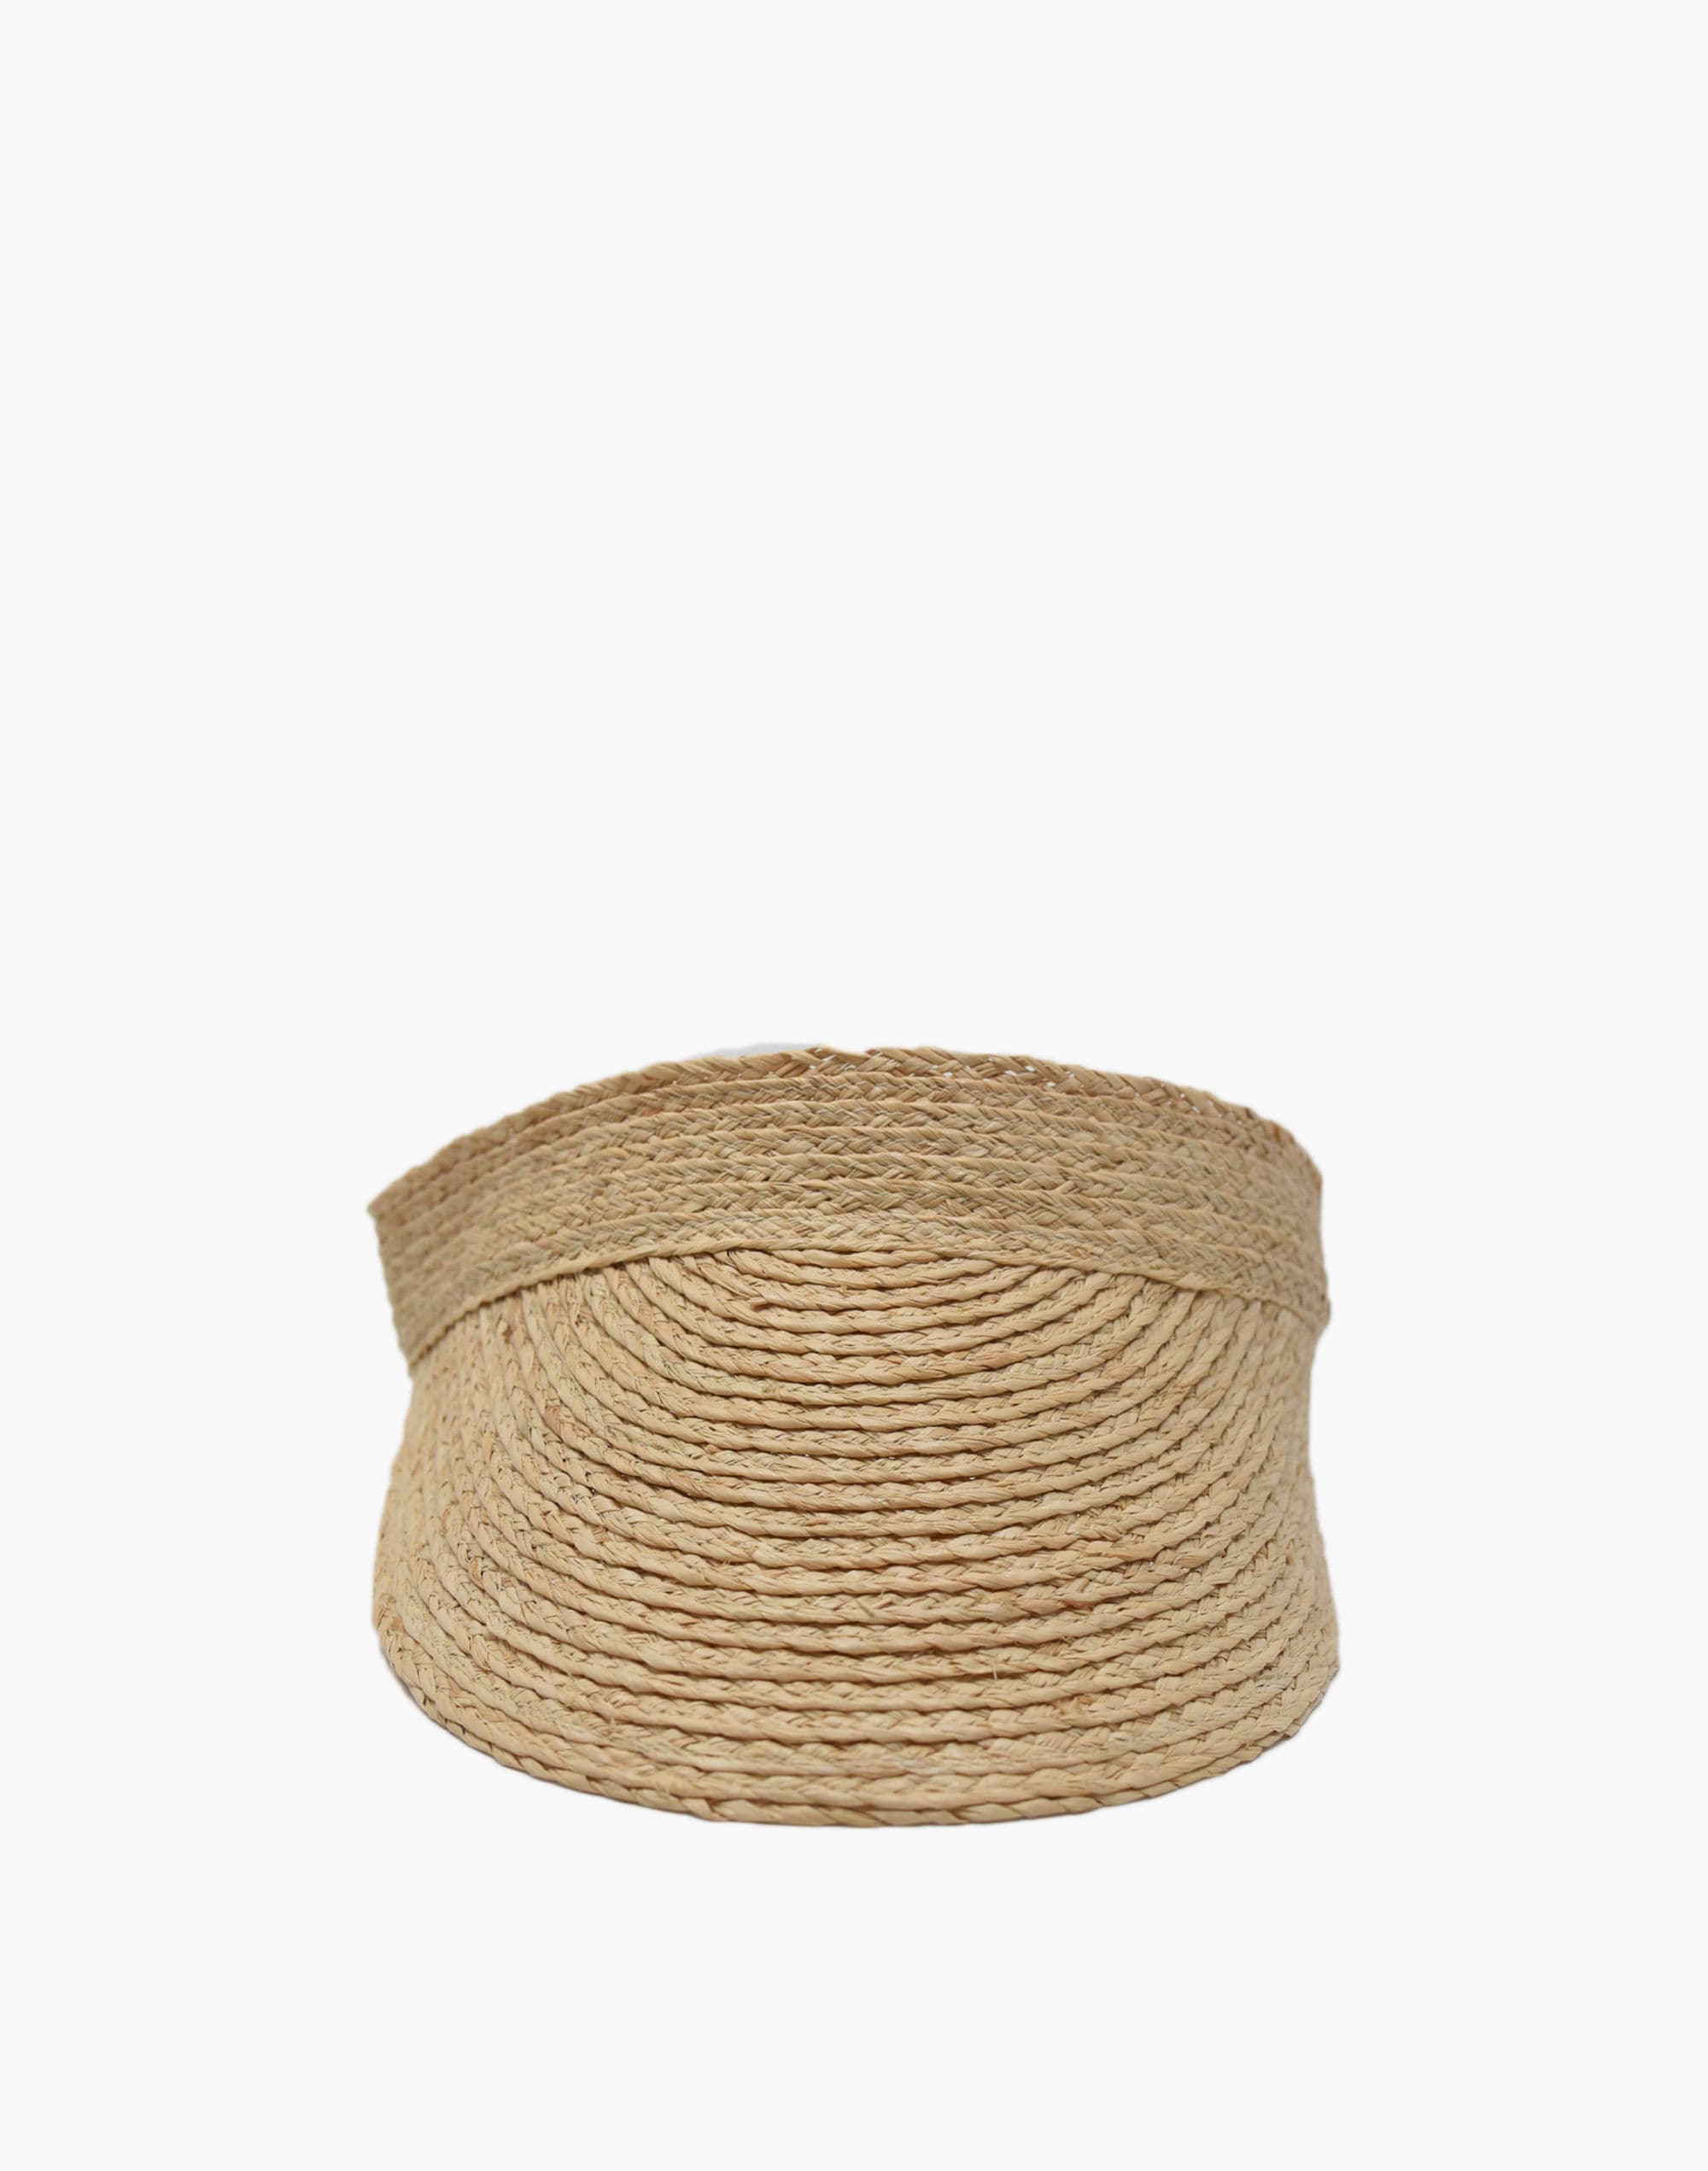 WYETH™ Courtney Packable Fedora Hat